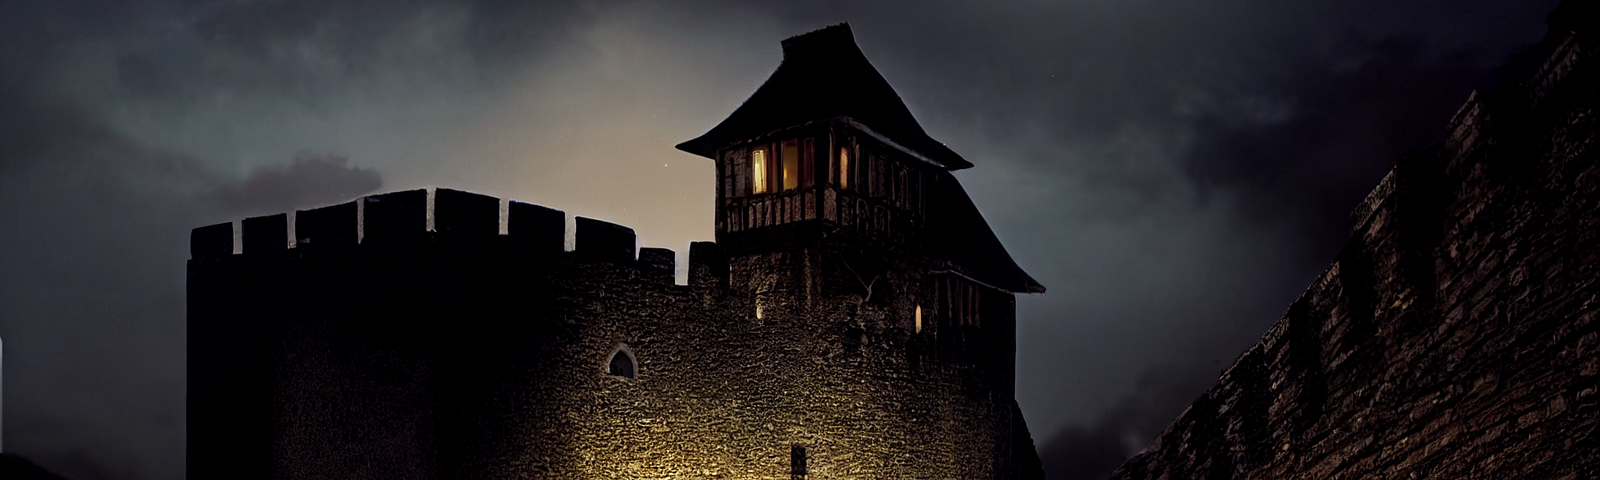 A medieval castle by moonlight